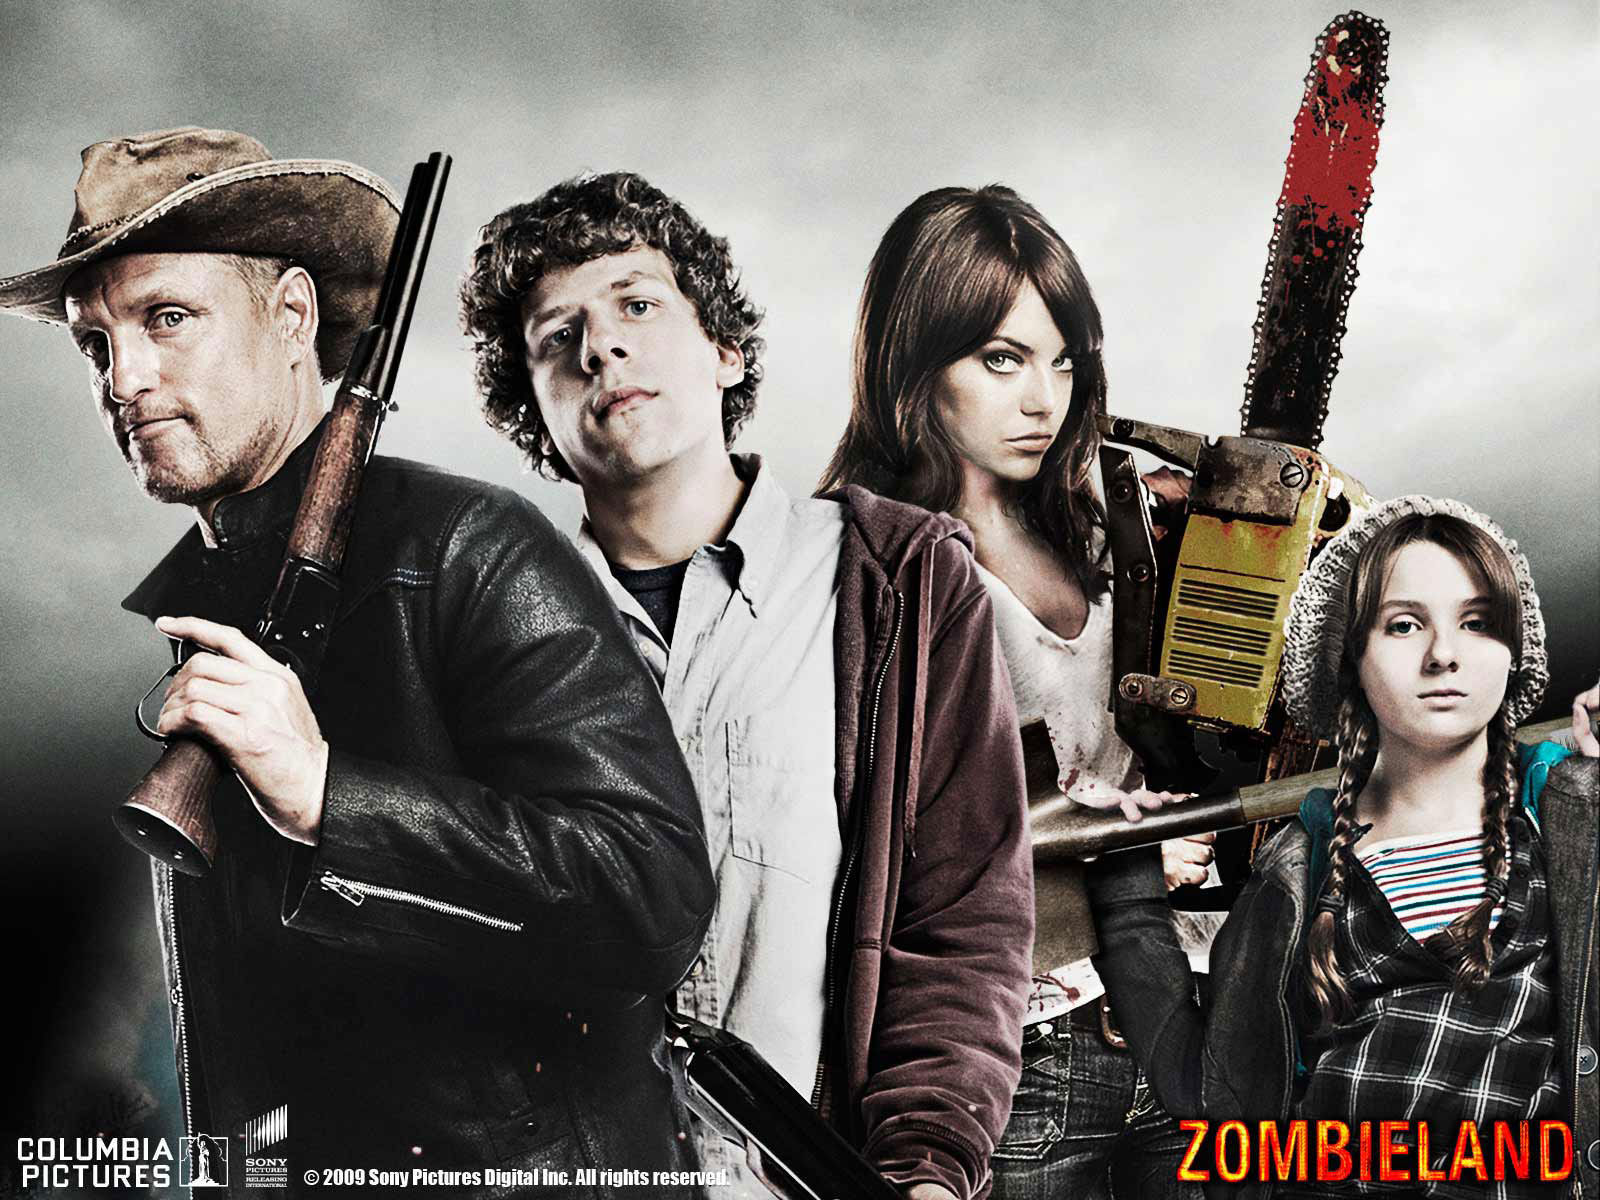 Zombieland Image HD Wallpaper And Background Photos